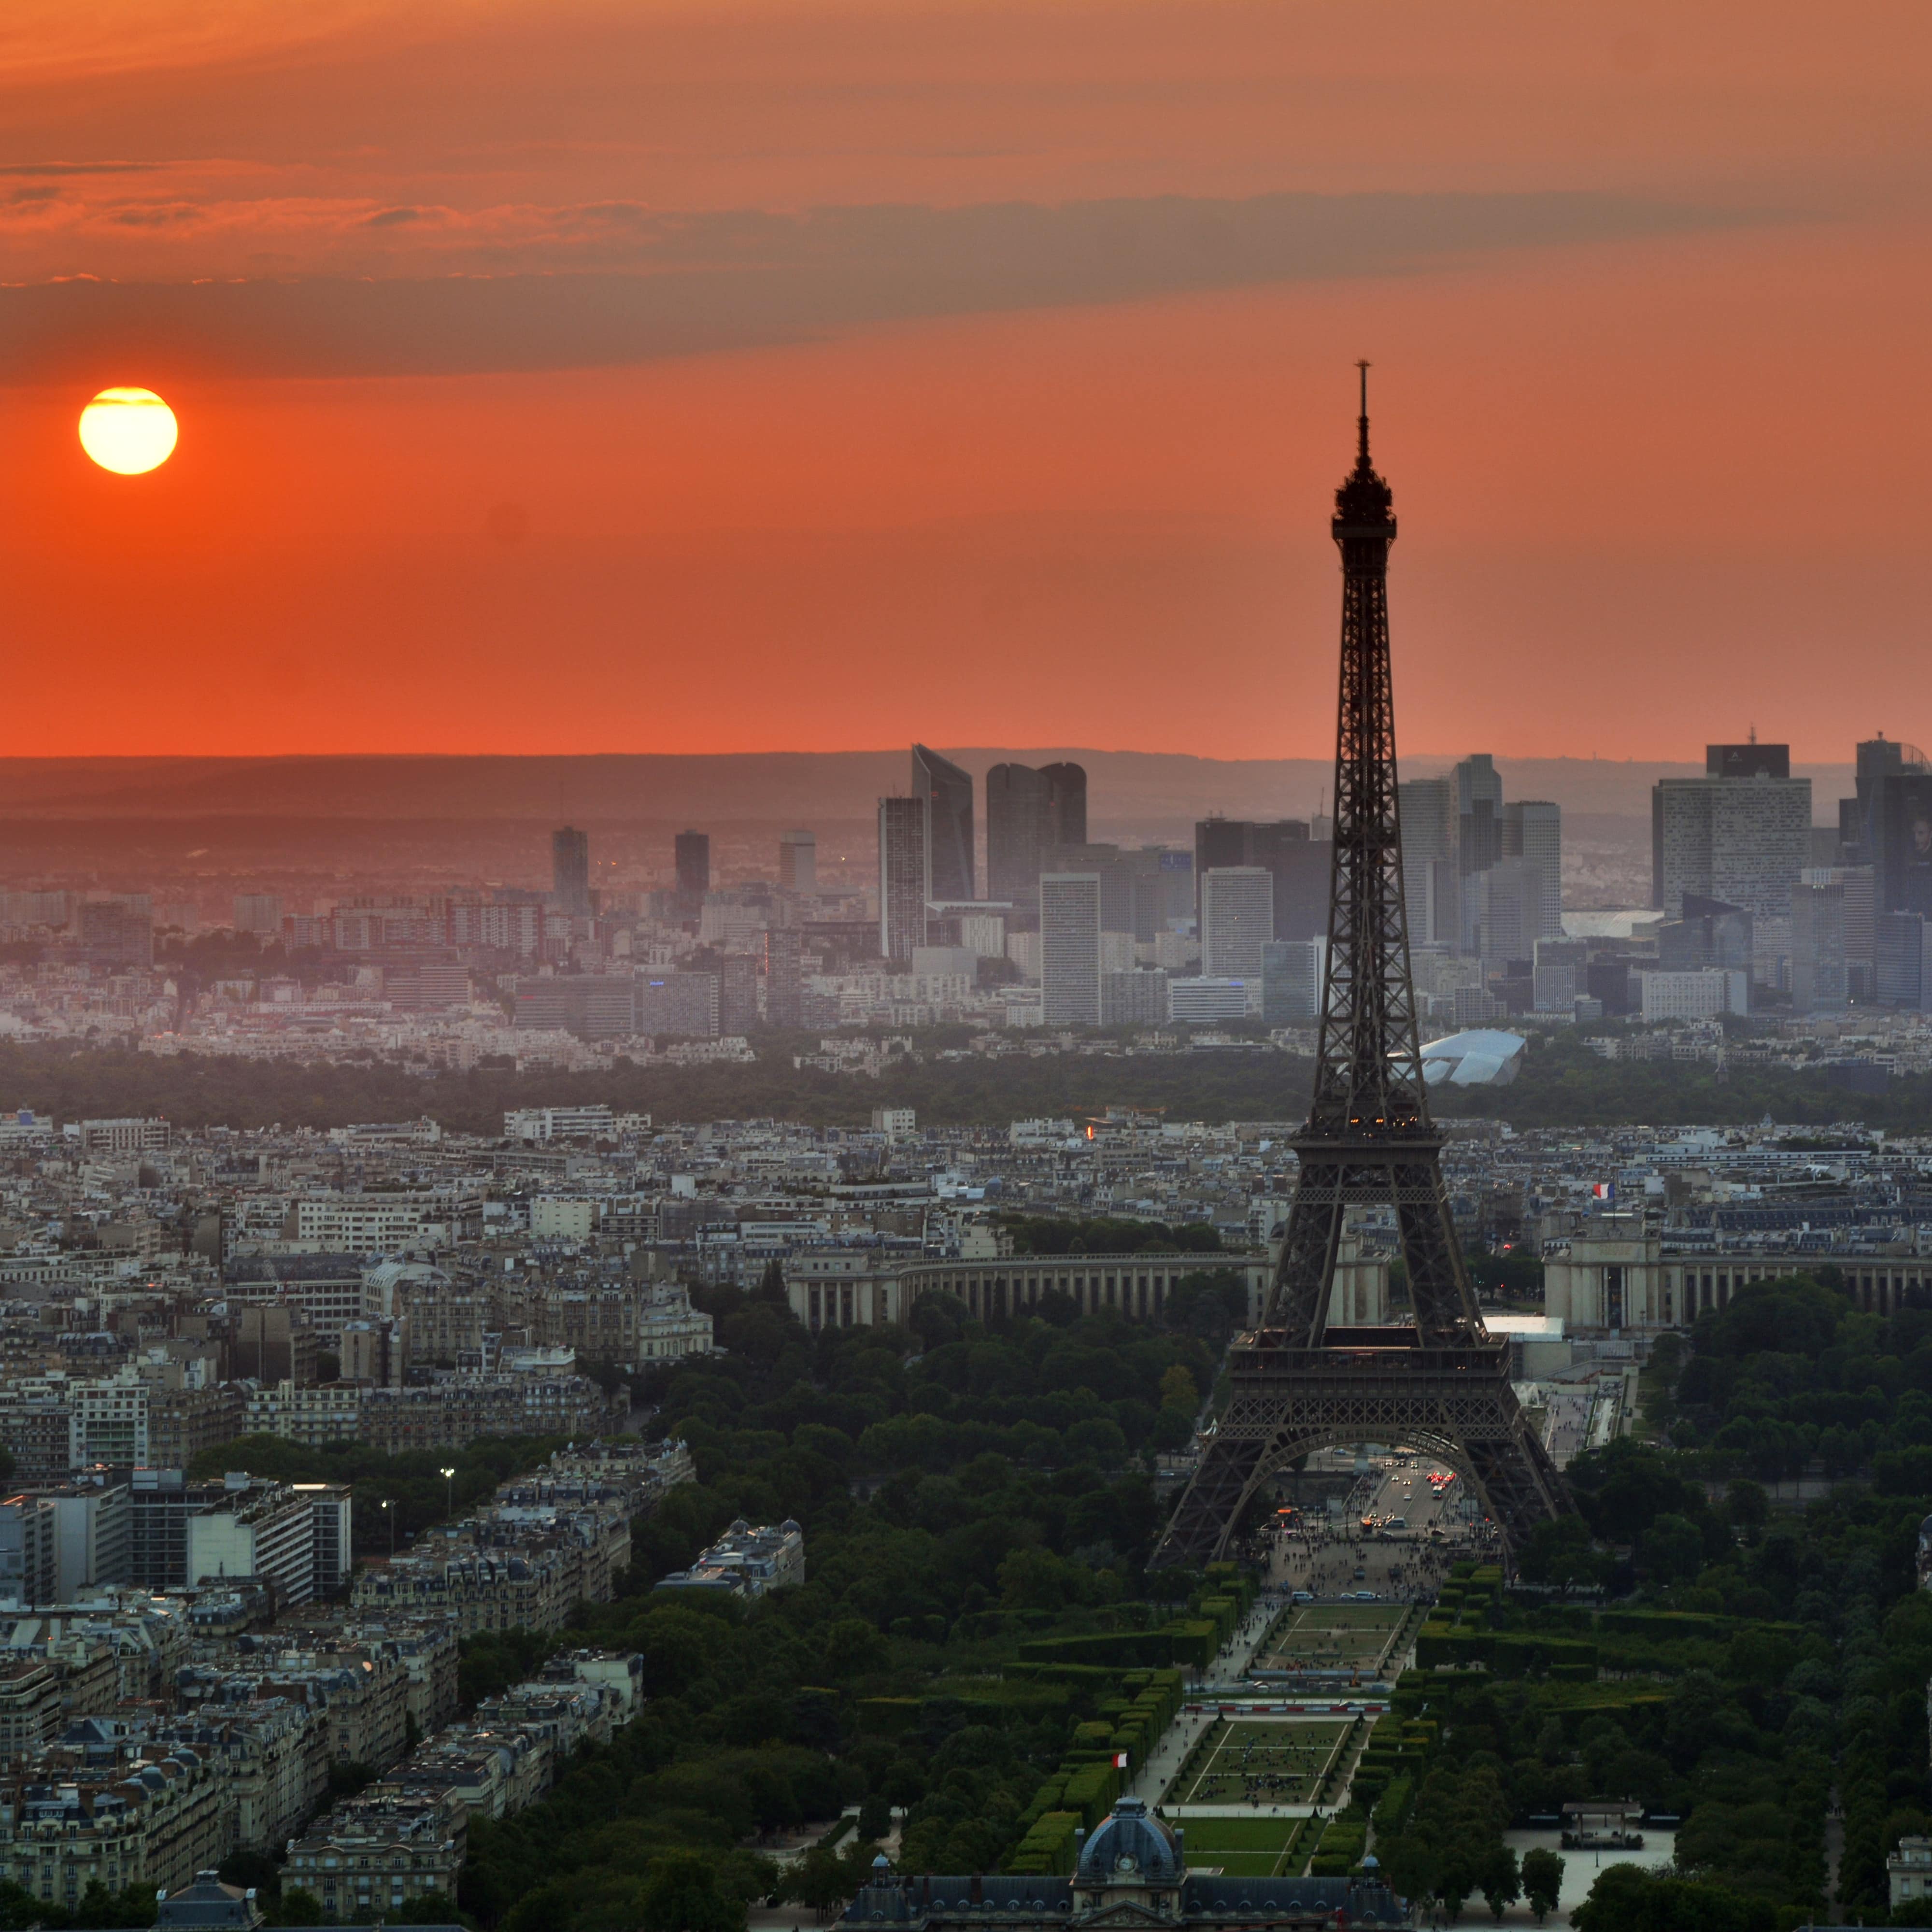 A view of Paris and the Eiffel Tower with skyscrapers of La Defense and the setting sun in the background